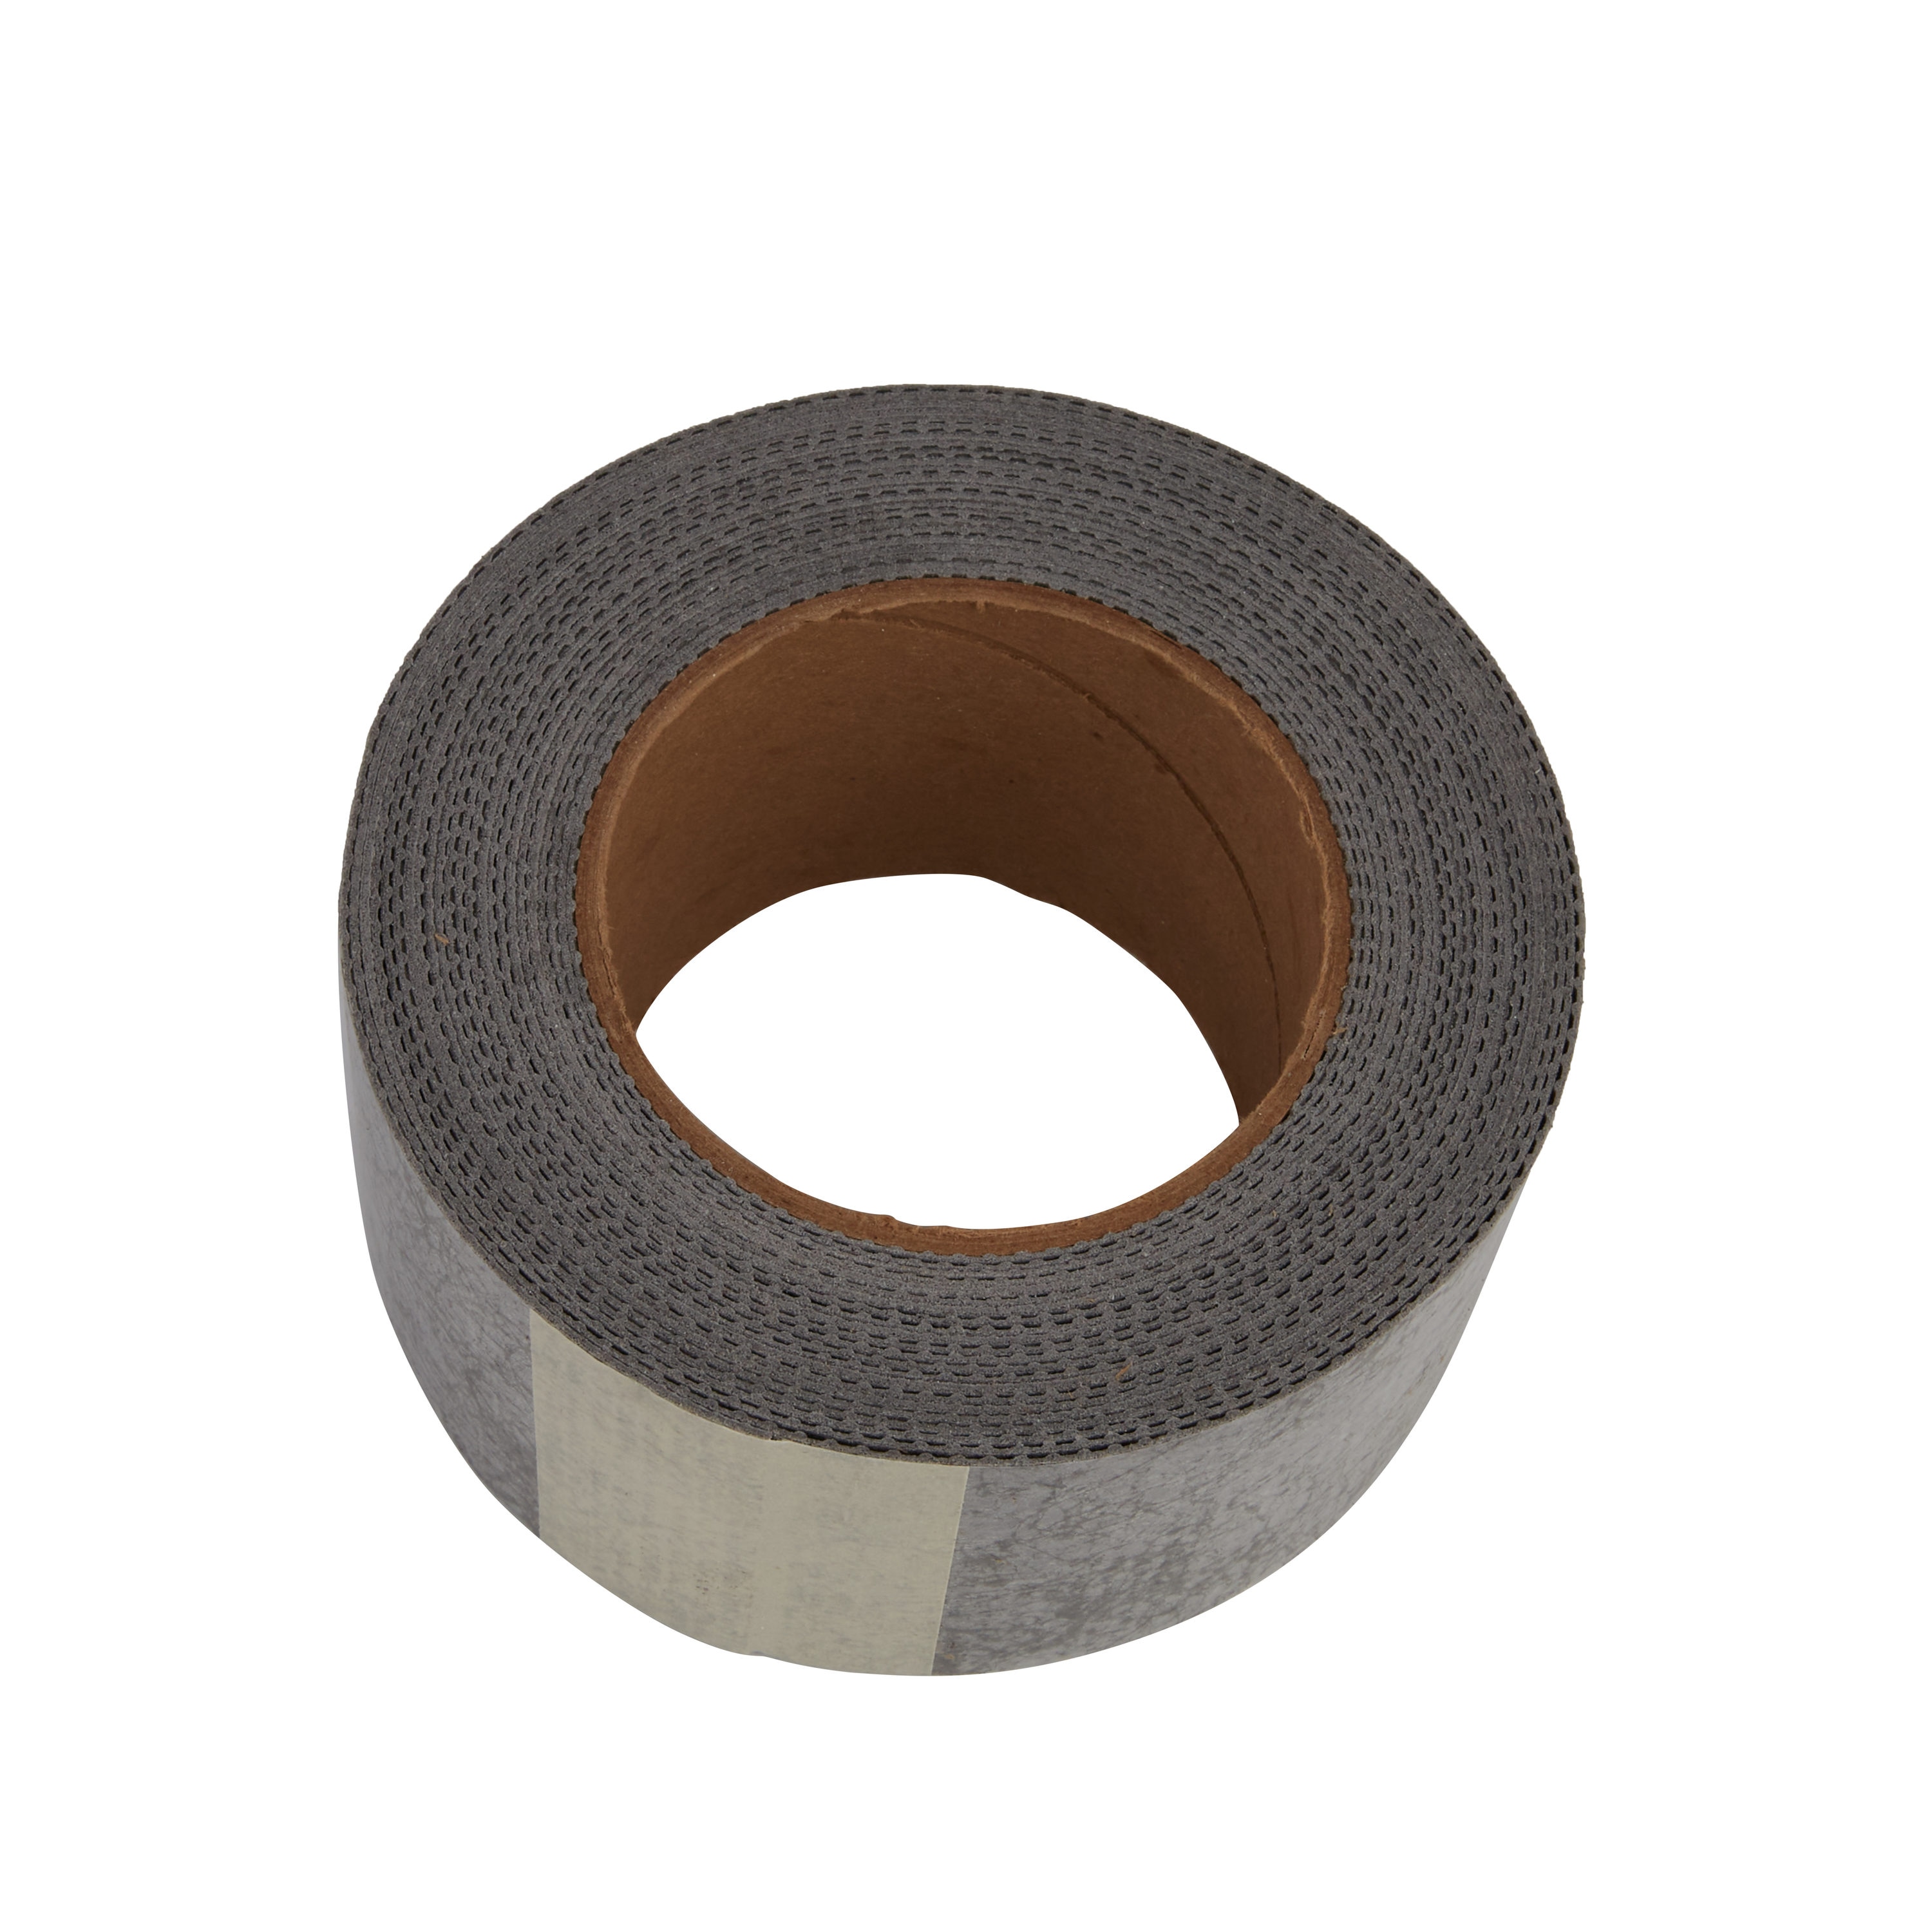 Intertape Polymer 6577357 Two Sided Carpet Tape 2 In. x 36 Yards, 1 -  Harris Teeter